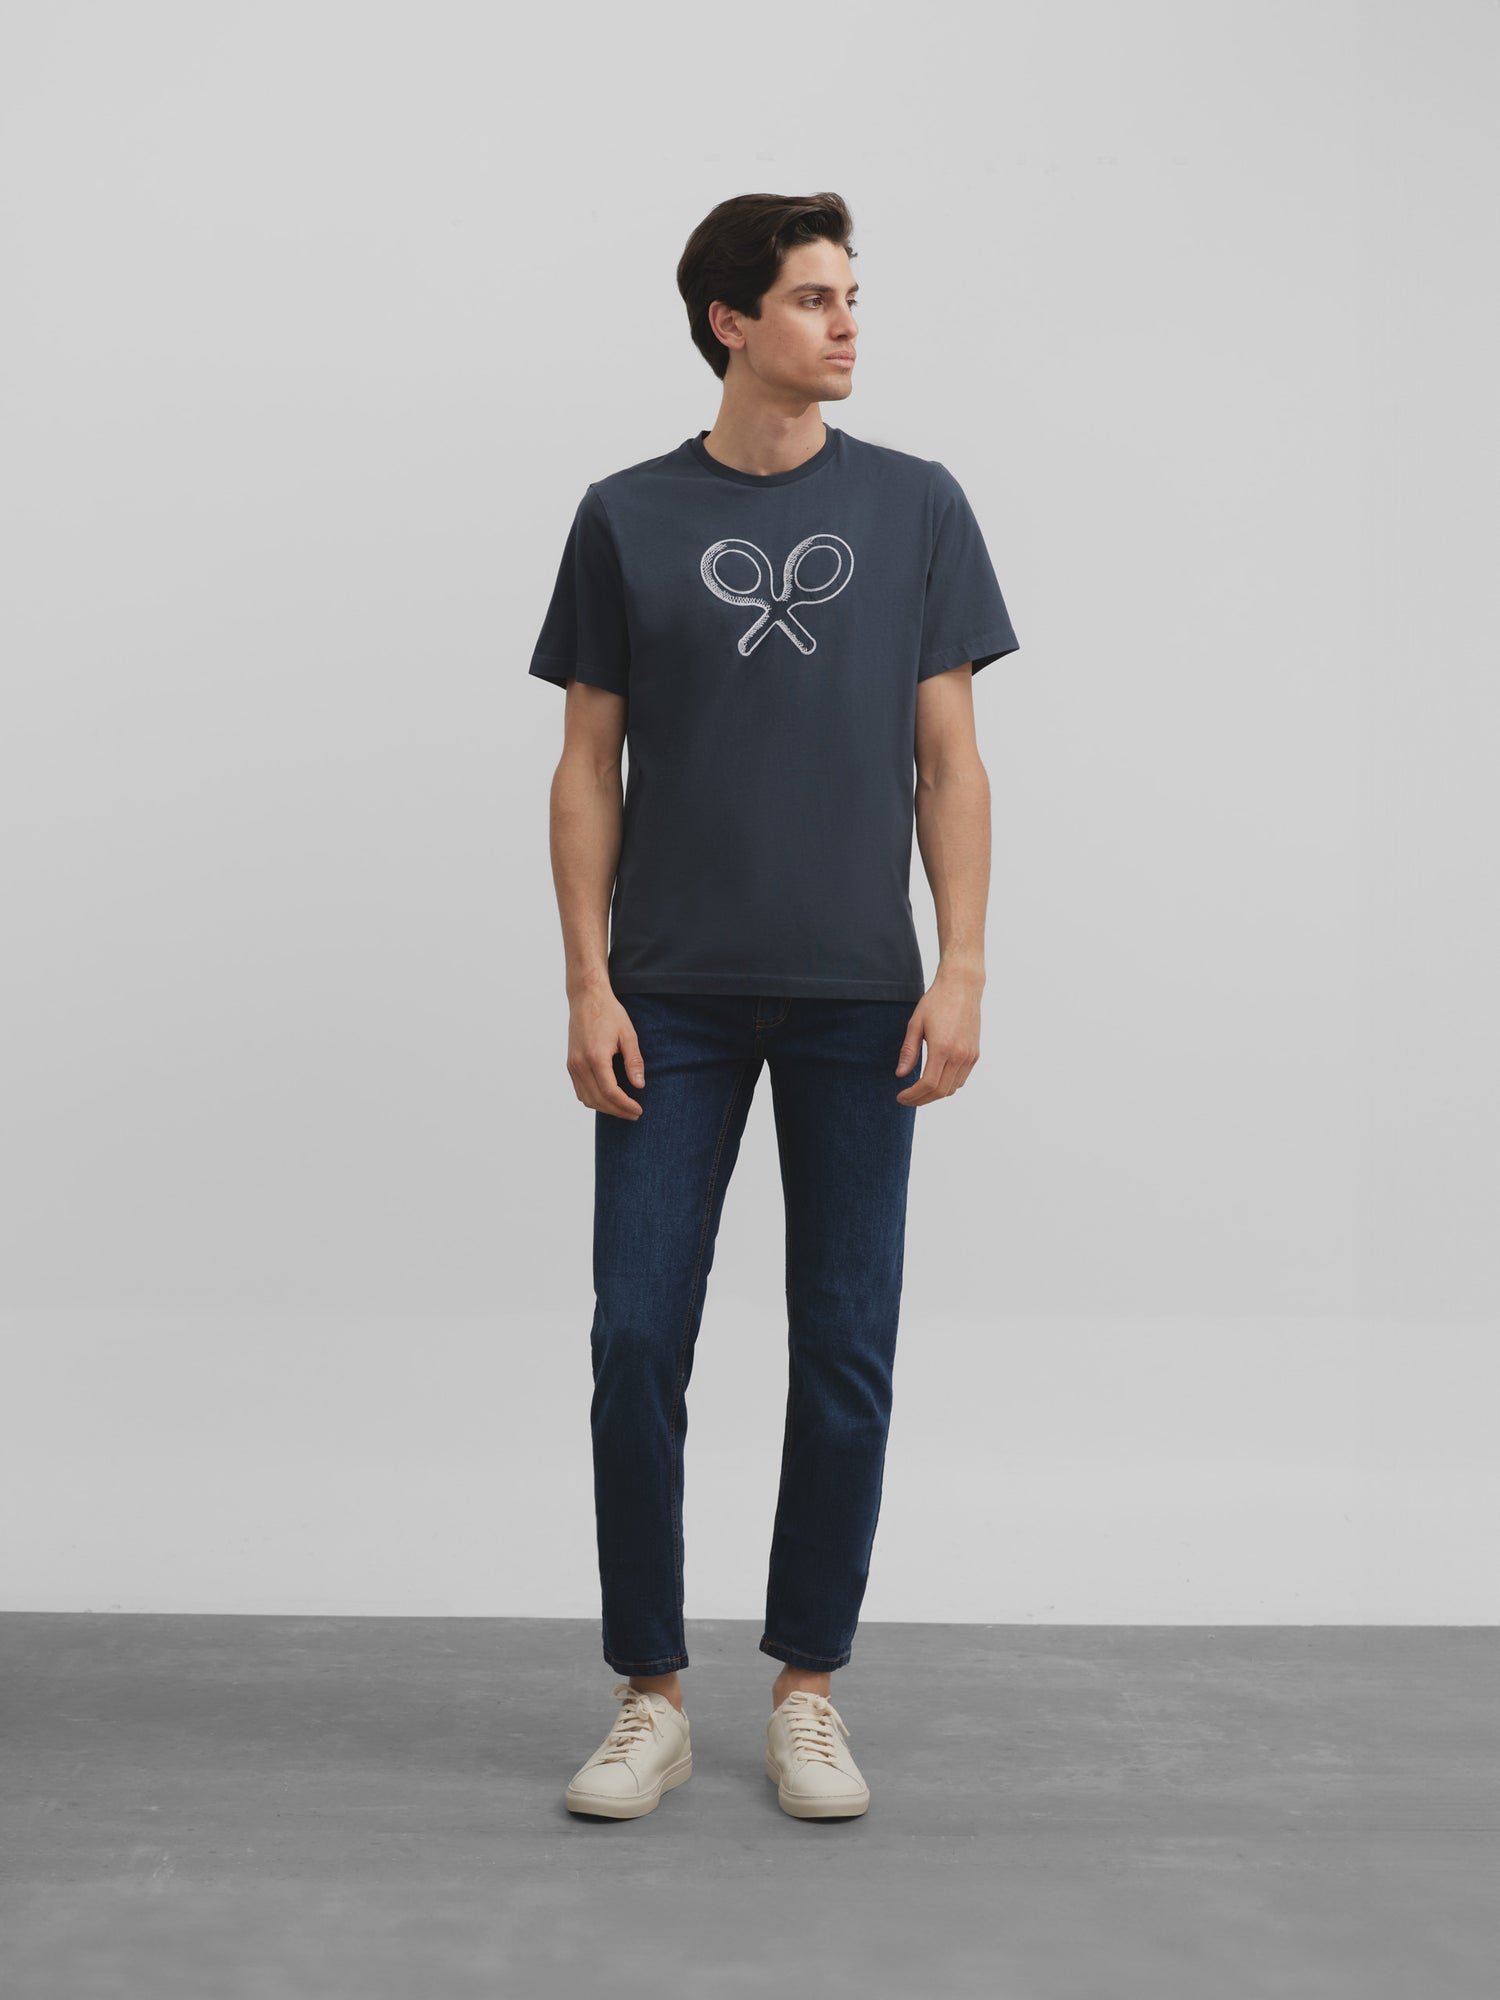 Navy blue embroidered racket t-shirt